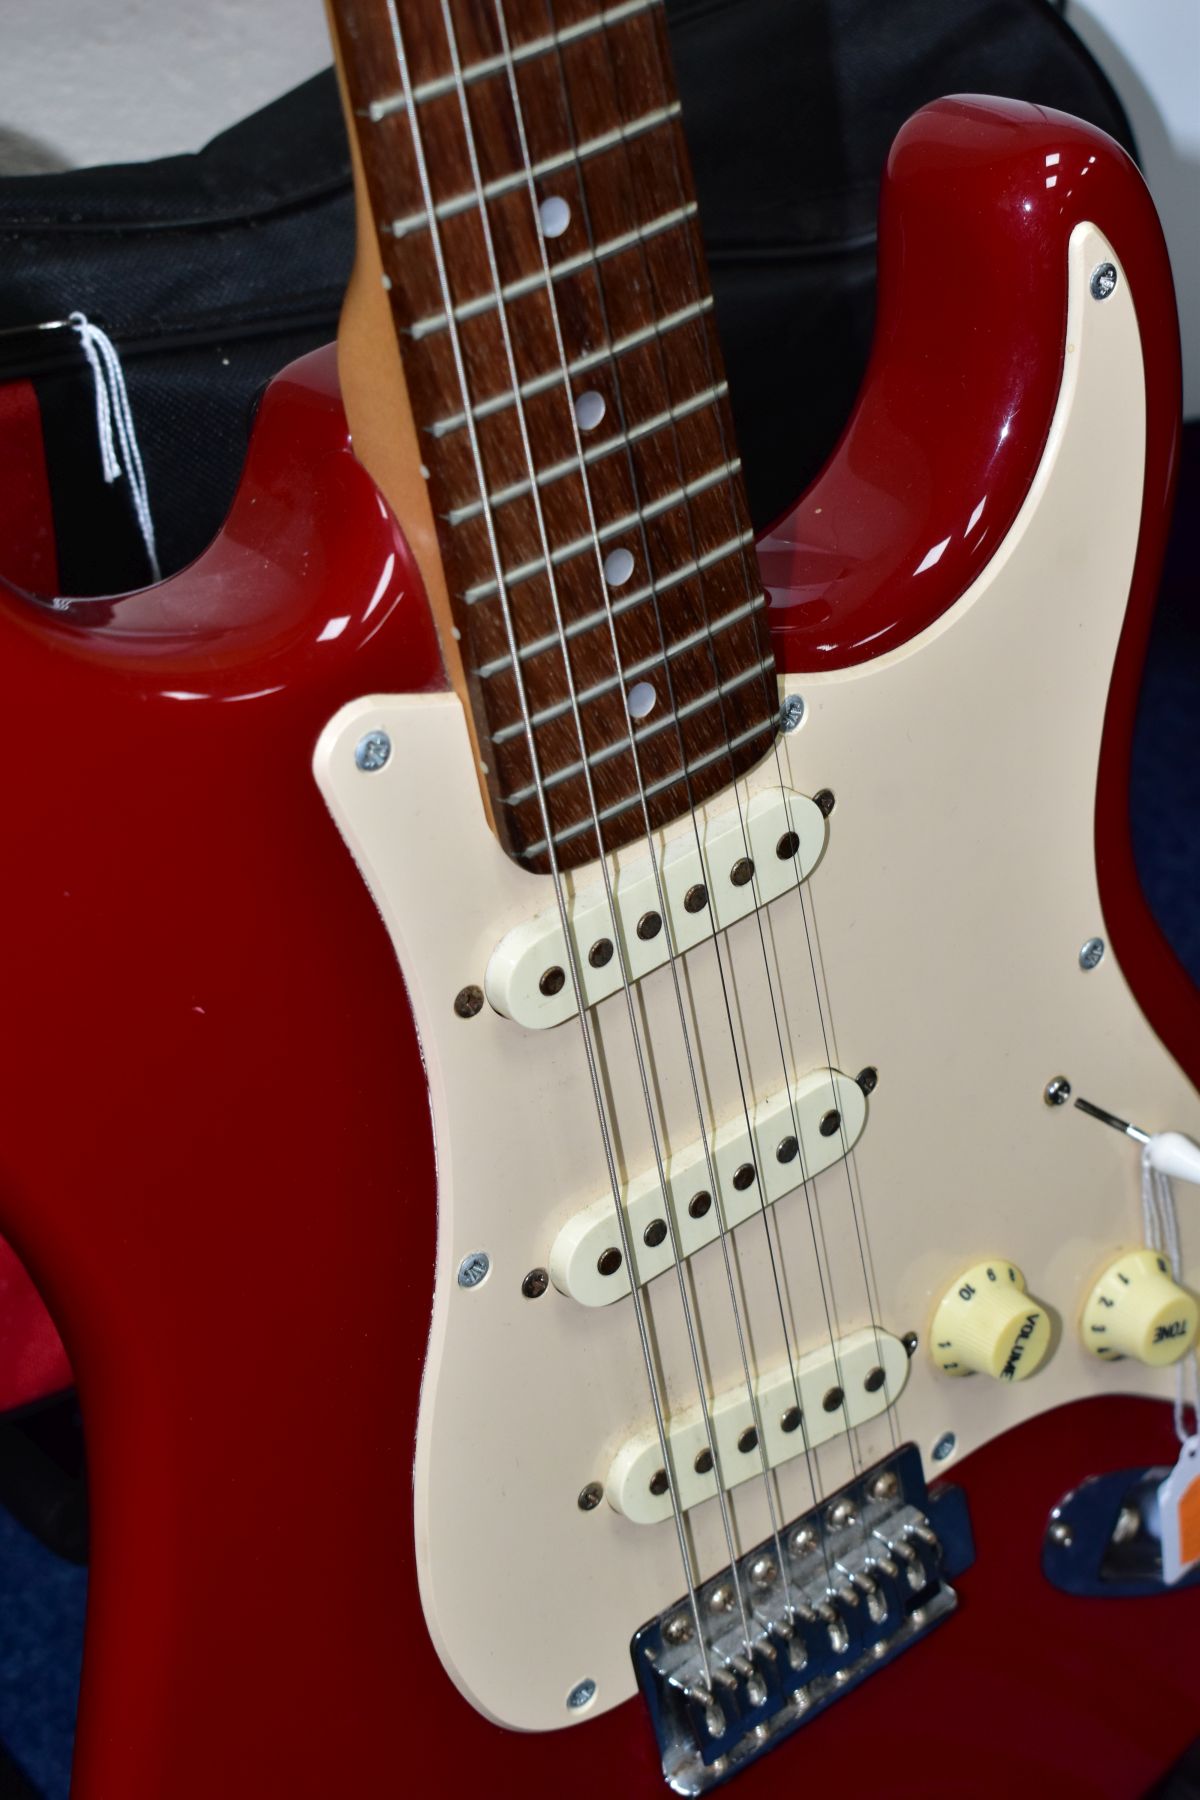 A SUNN MUSTANG ELECTRIC GUITAR, RED AND CREAM FINISH, serial number NC434622, made in China, - Image 6 of 8